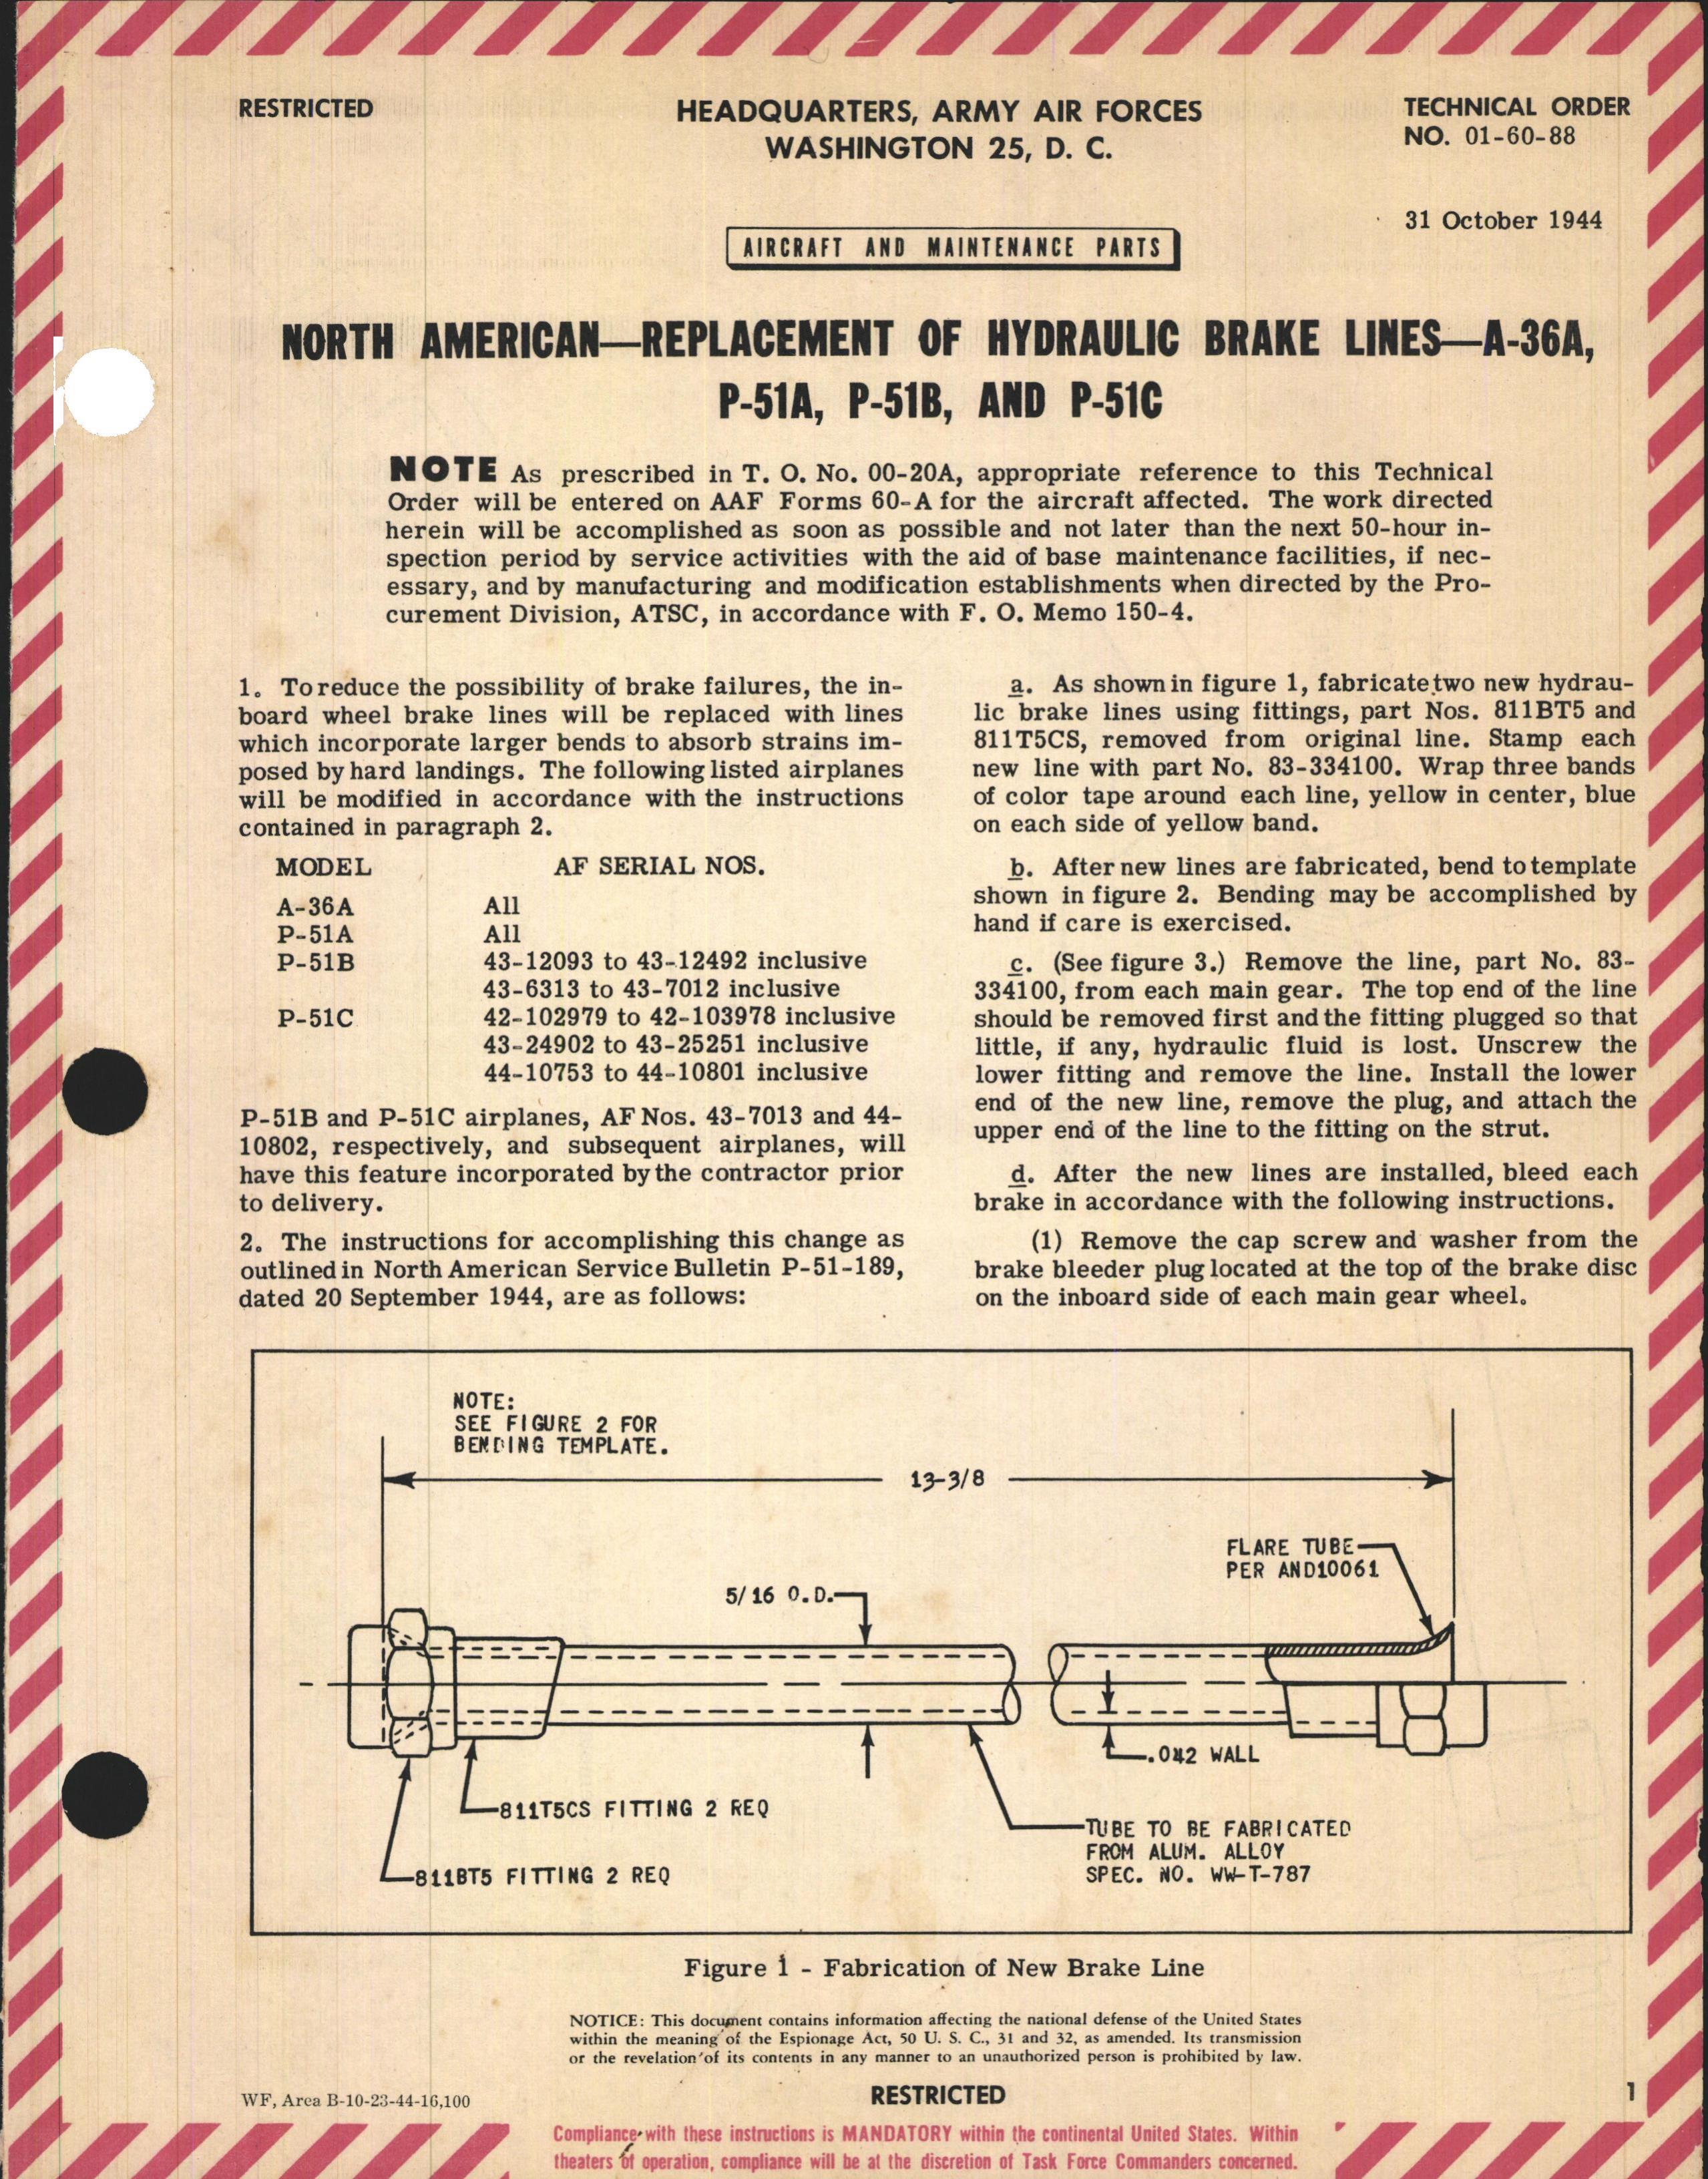 Sample page 1 from AirCorps Library document: Replacement of Hydraulic Brake Lines for A-36A, P-51A, B, and C